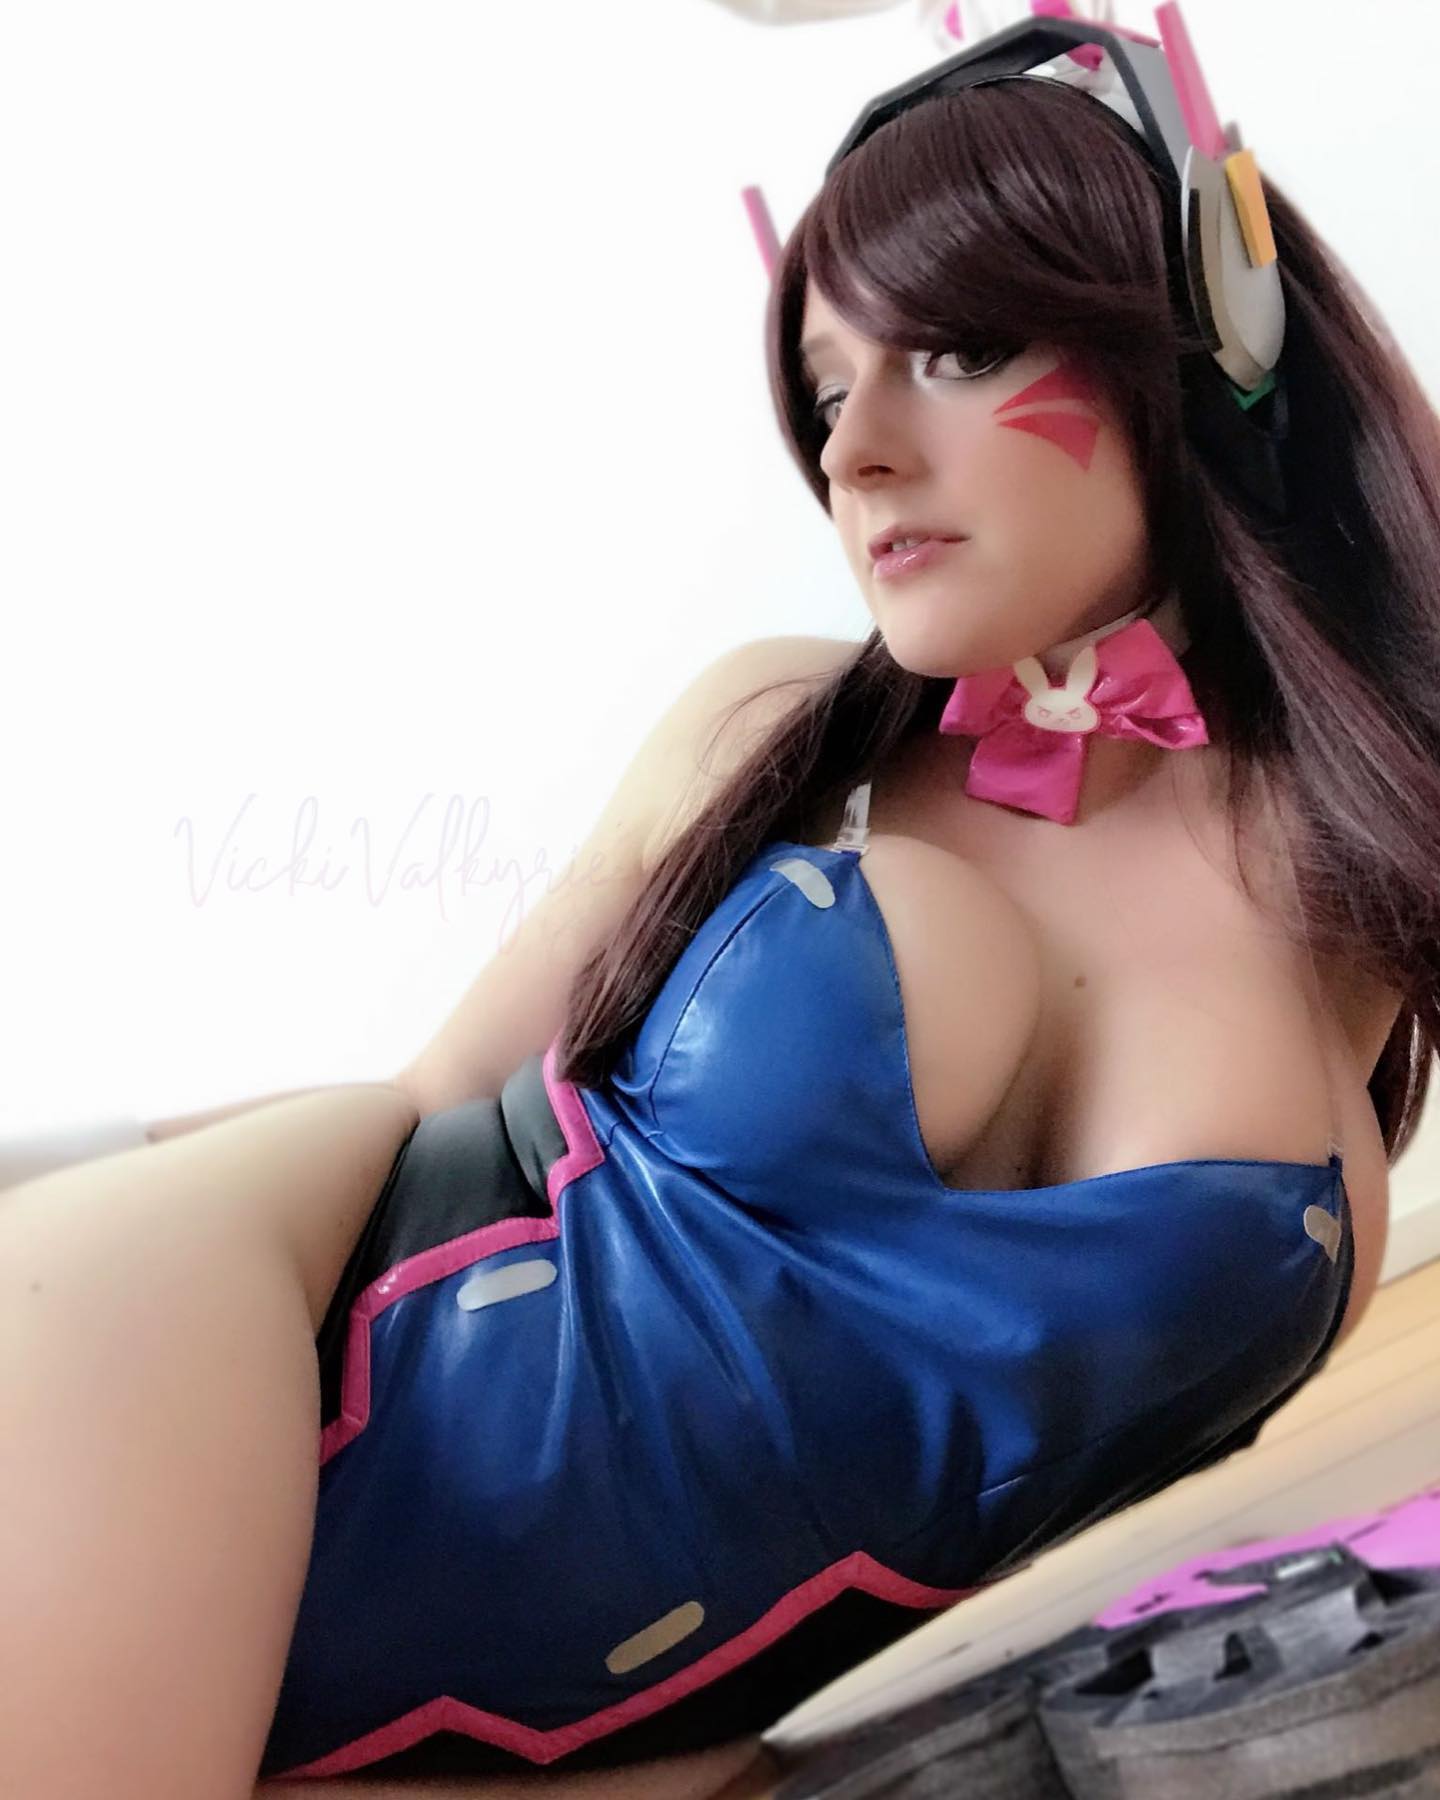 Happy Easter!! 🐰 Don’t forget to check out my sale! 😘 Lℹ️nk im bℹ️0! 💕

#cosplayer #cosplayer #cosplaygirl #cosplaygirls #cosplayersofinstagram #dva #dvacosplay #bunnygirl #overwatch #overwatchcosplay #gamecosplay